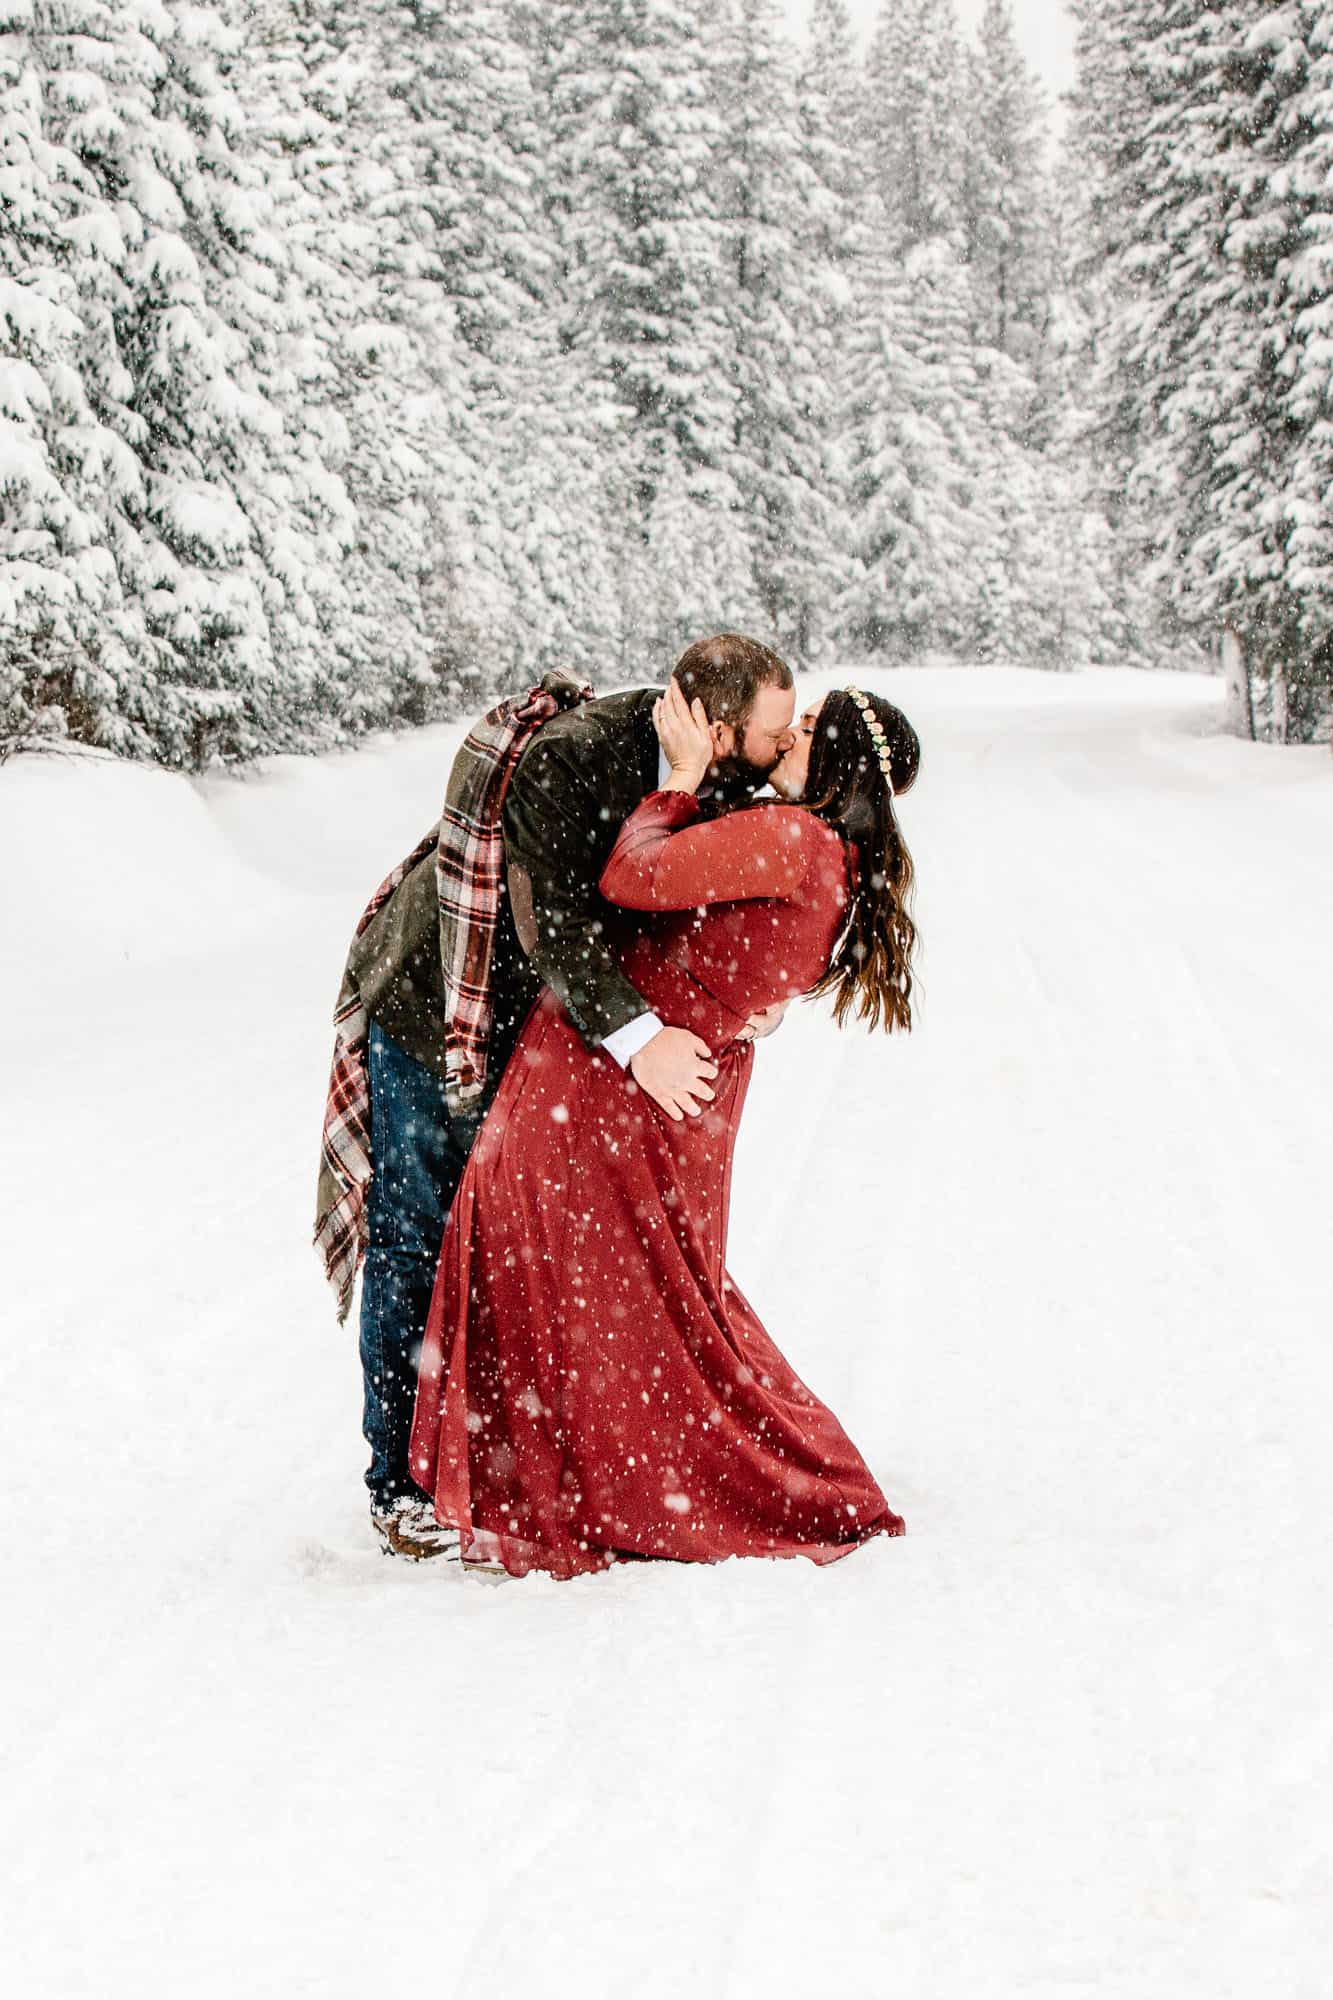 Couple getting eloped in Colorado in the winter wonderland